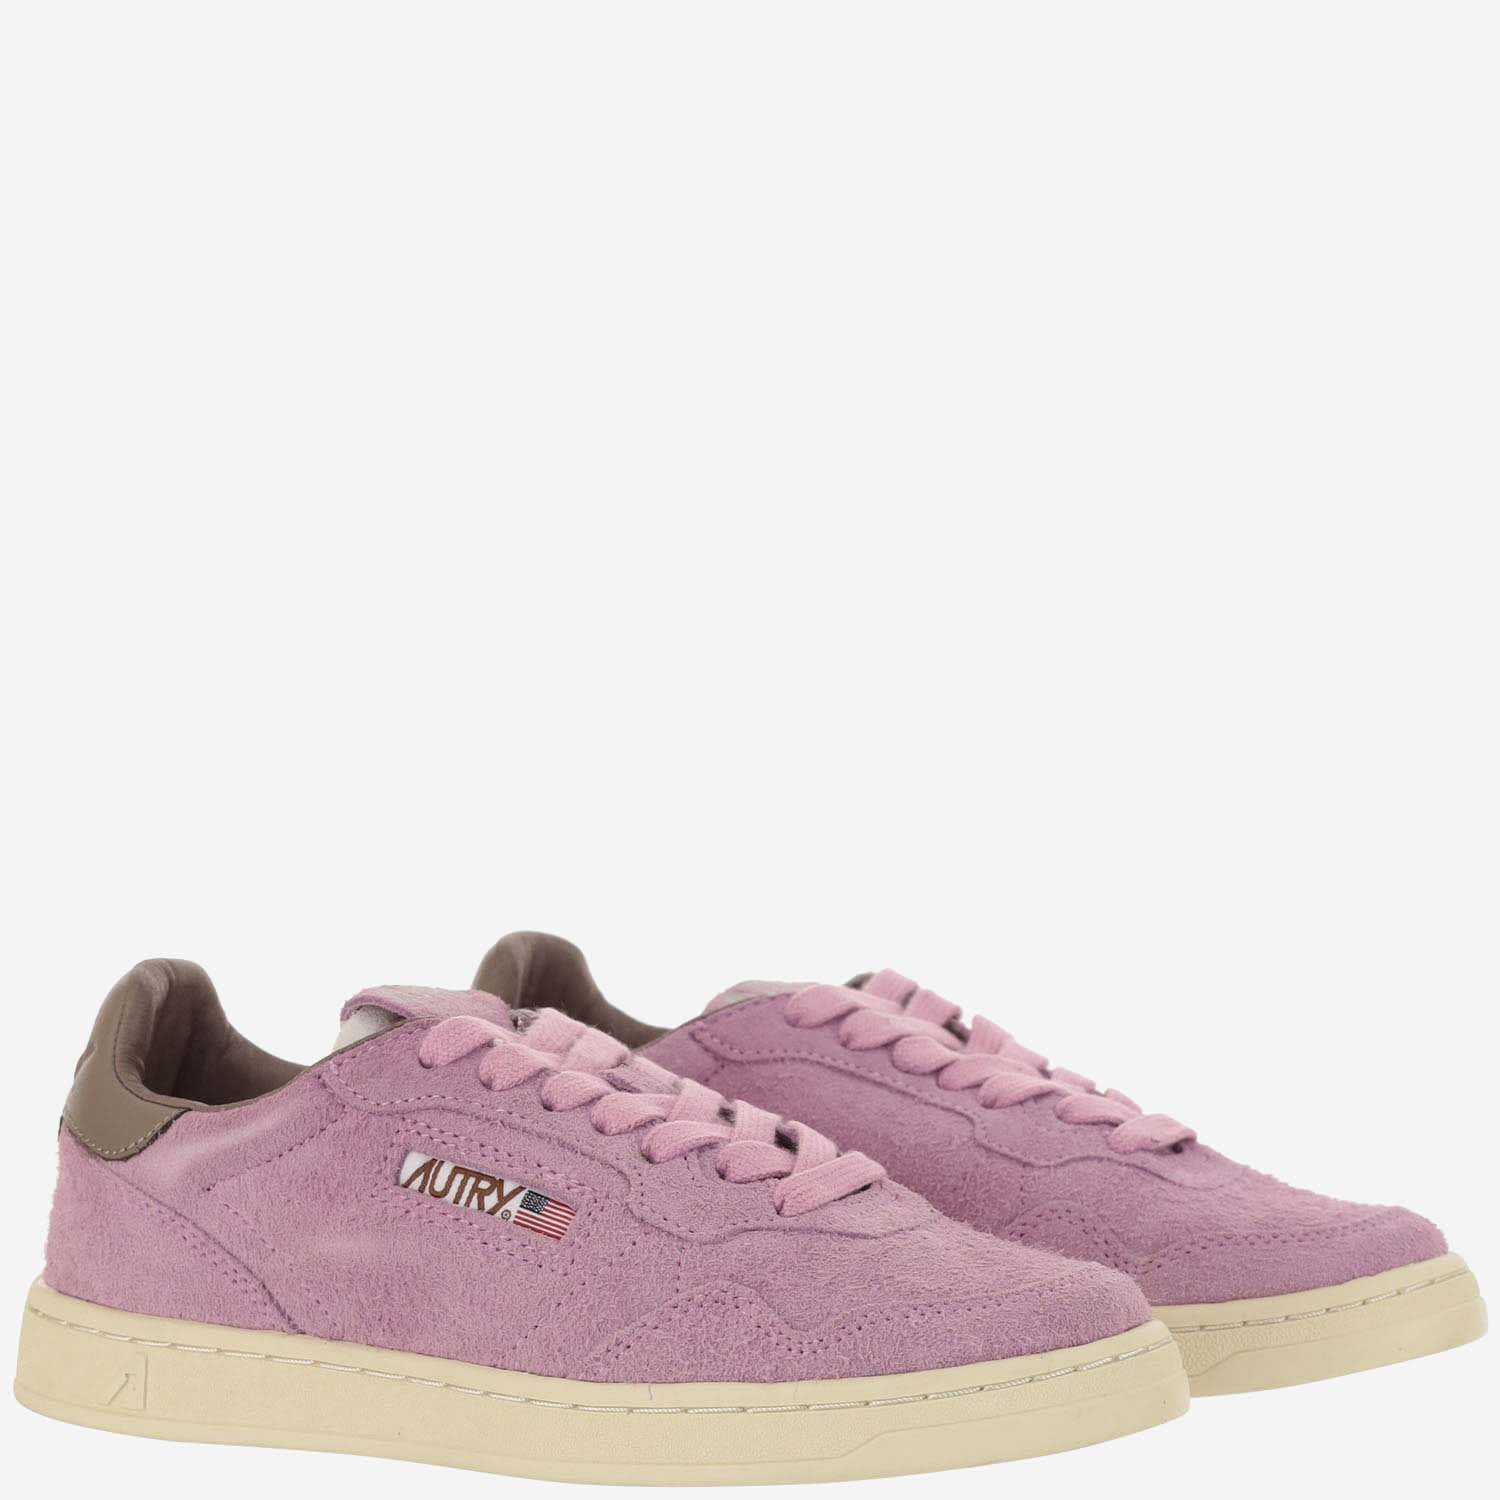 Shop Autry Medalist Low Sneakers In Suede Hair Sand Effect In Green